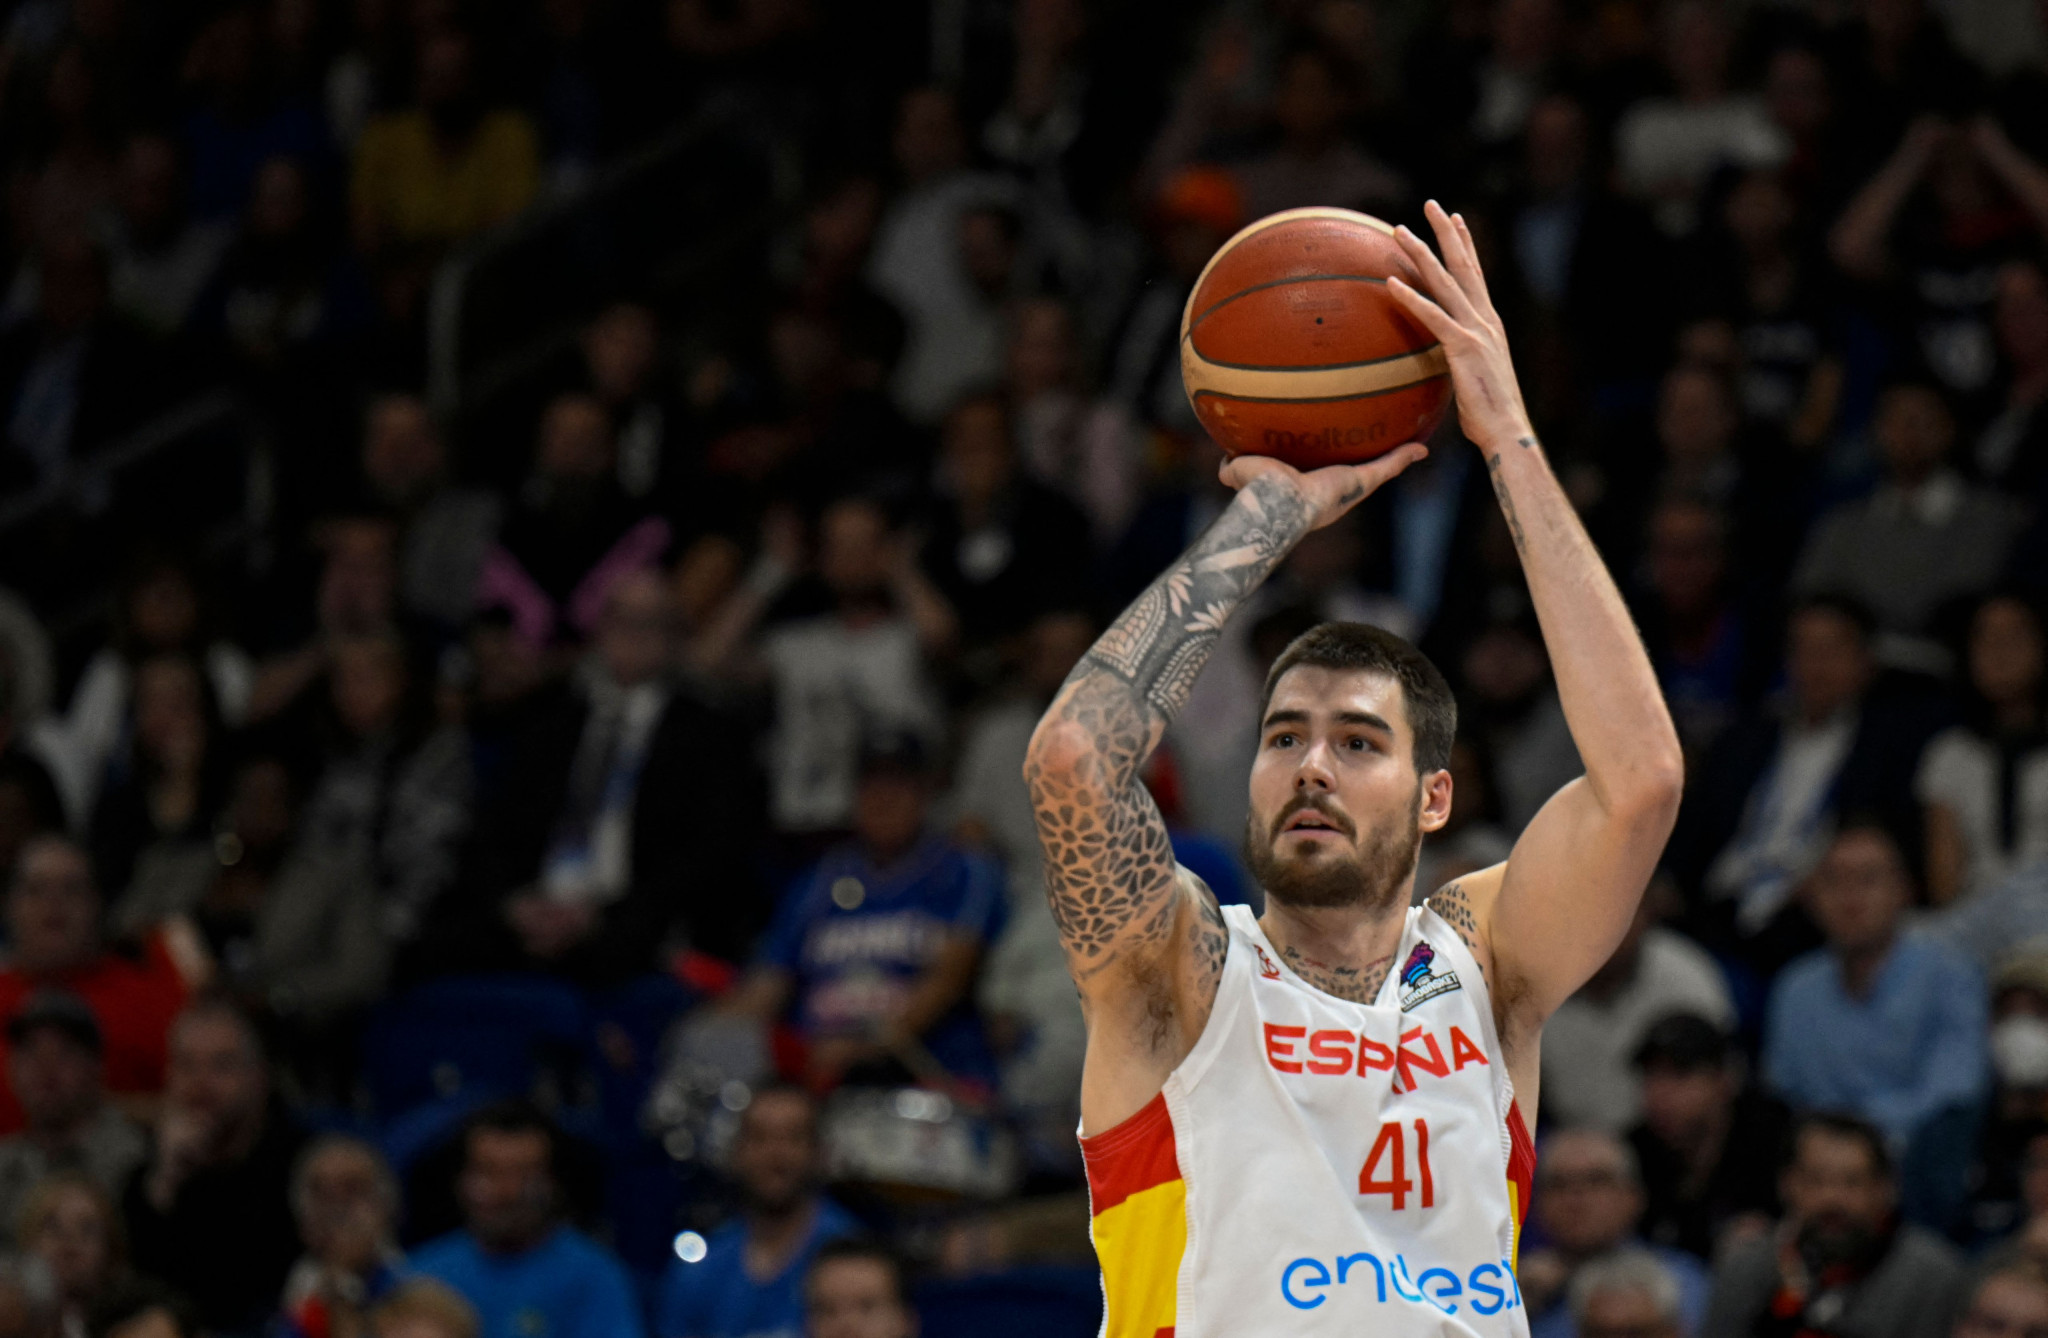 Juancho Hernangomez was player of the match as Spain beat France in the EuroBasket final ©Getty Images